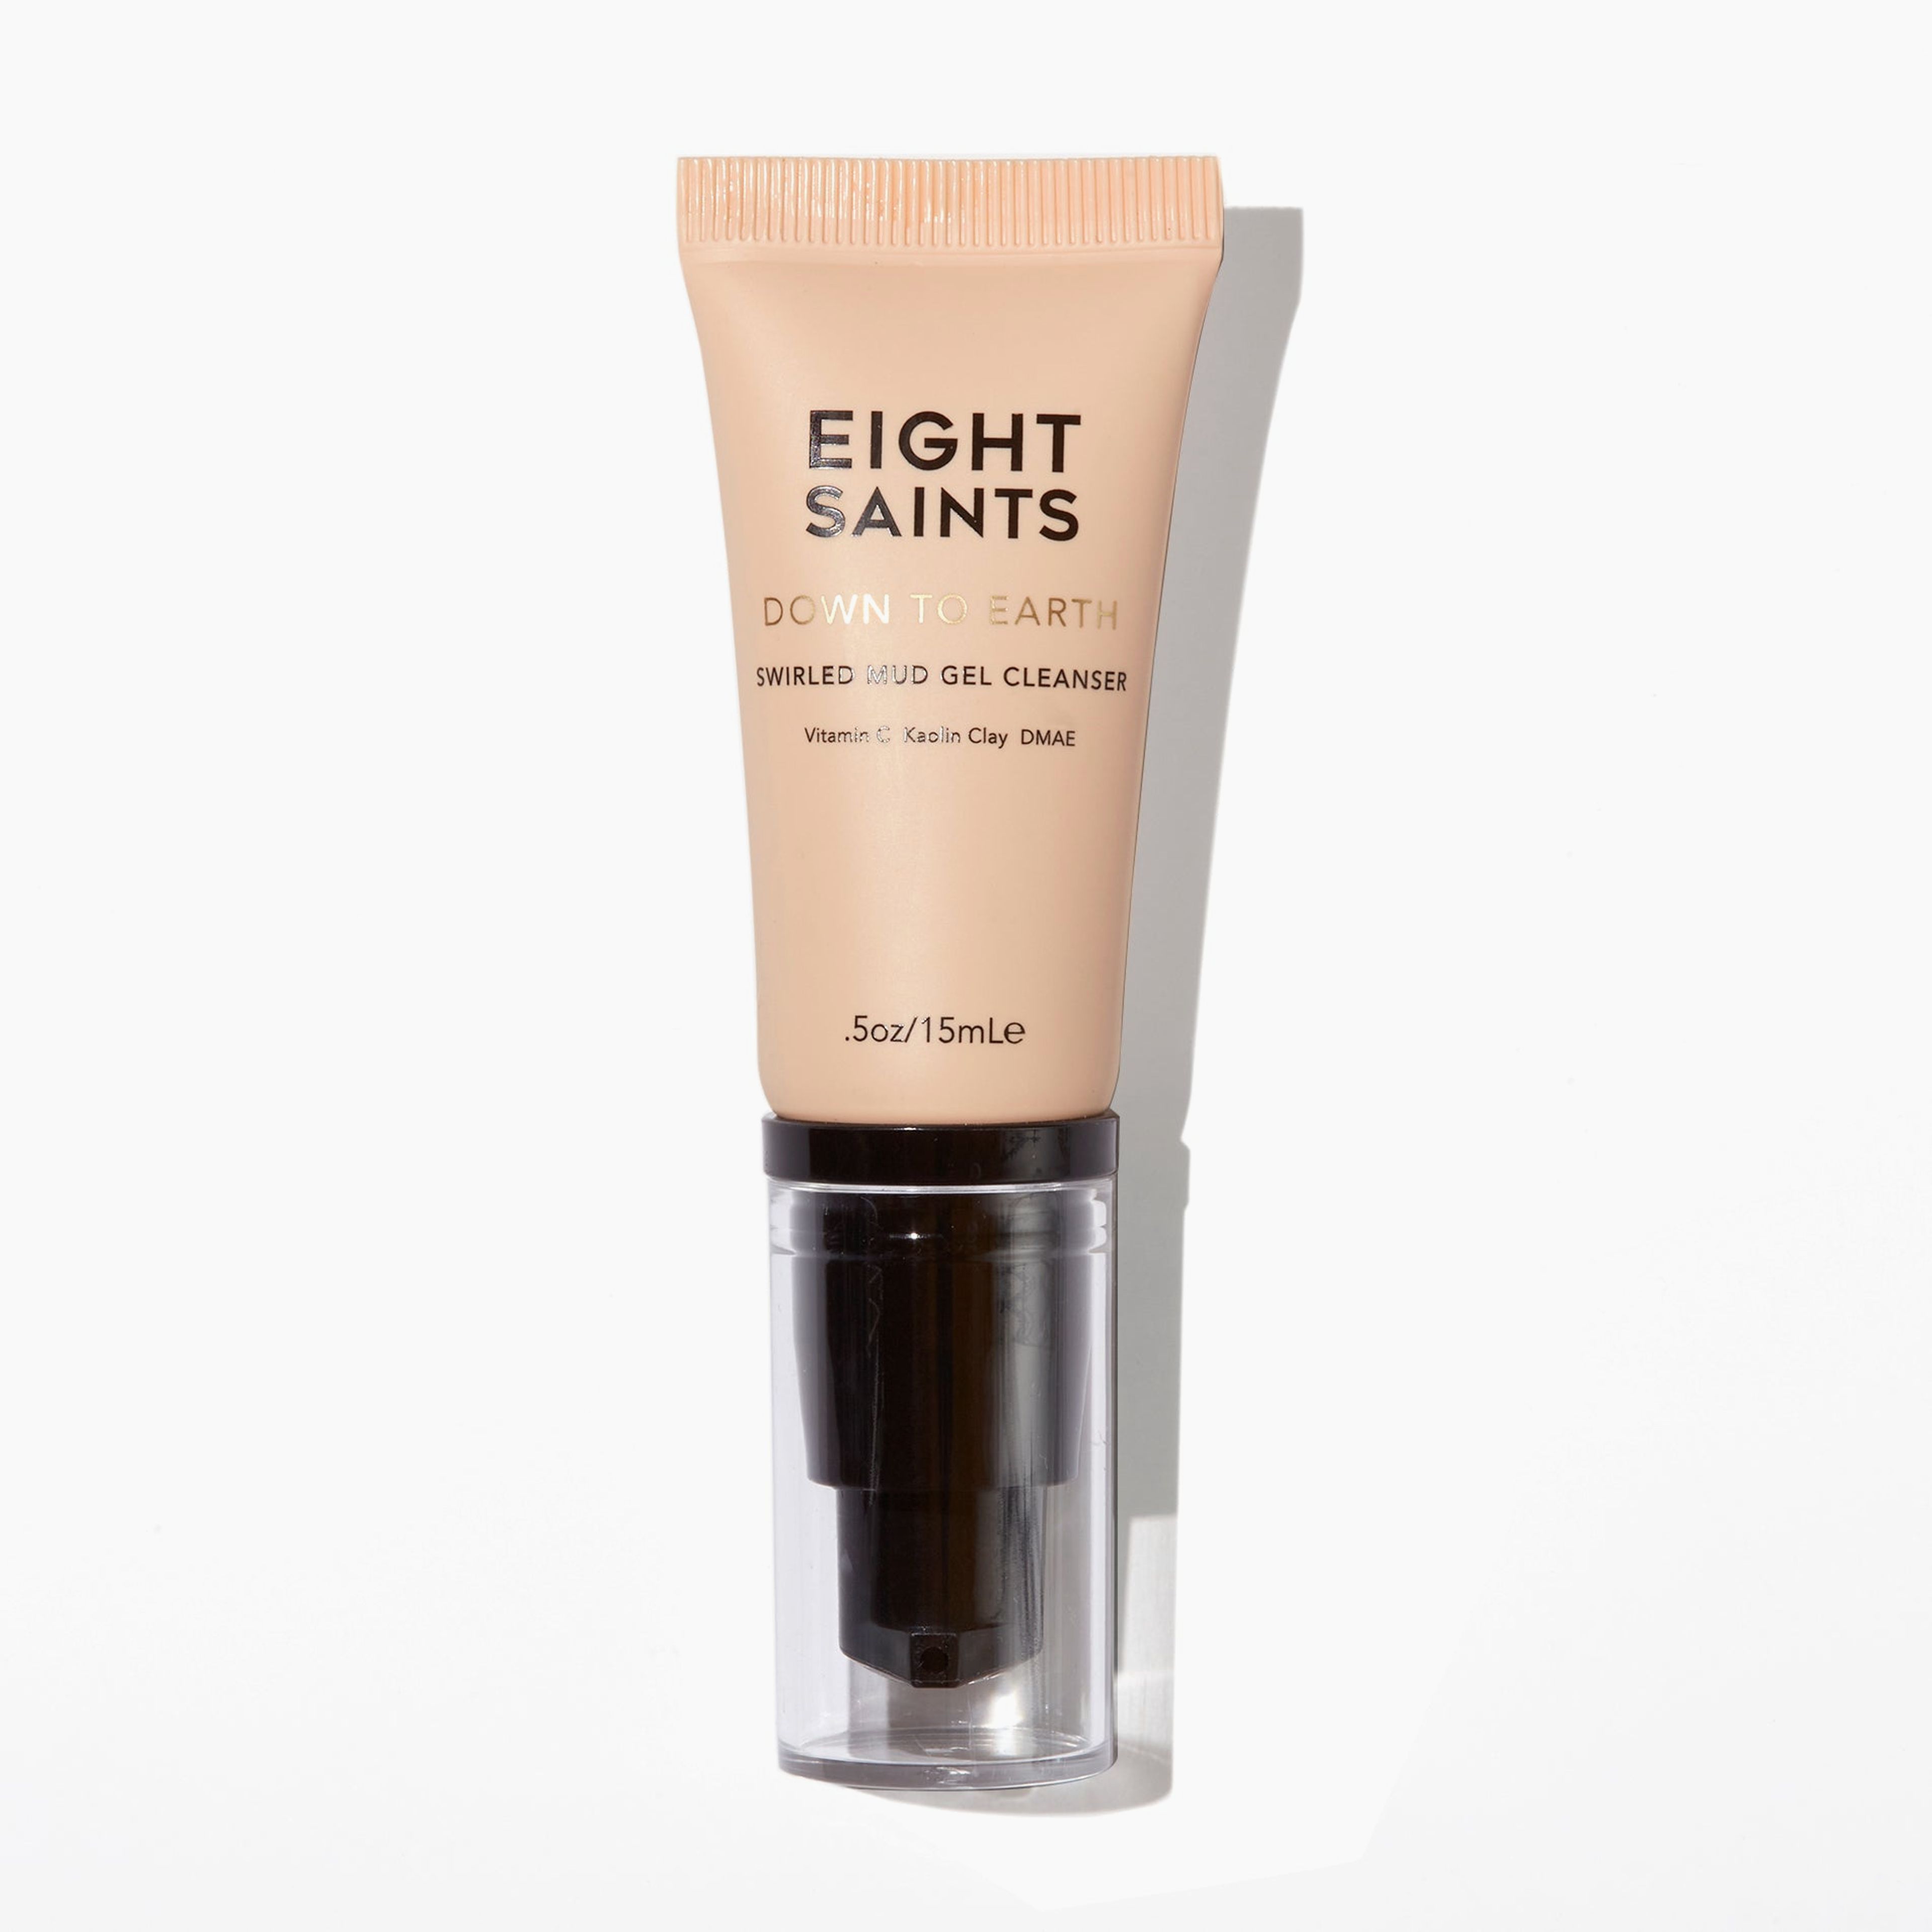 Down to Earth Gel Cleanser